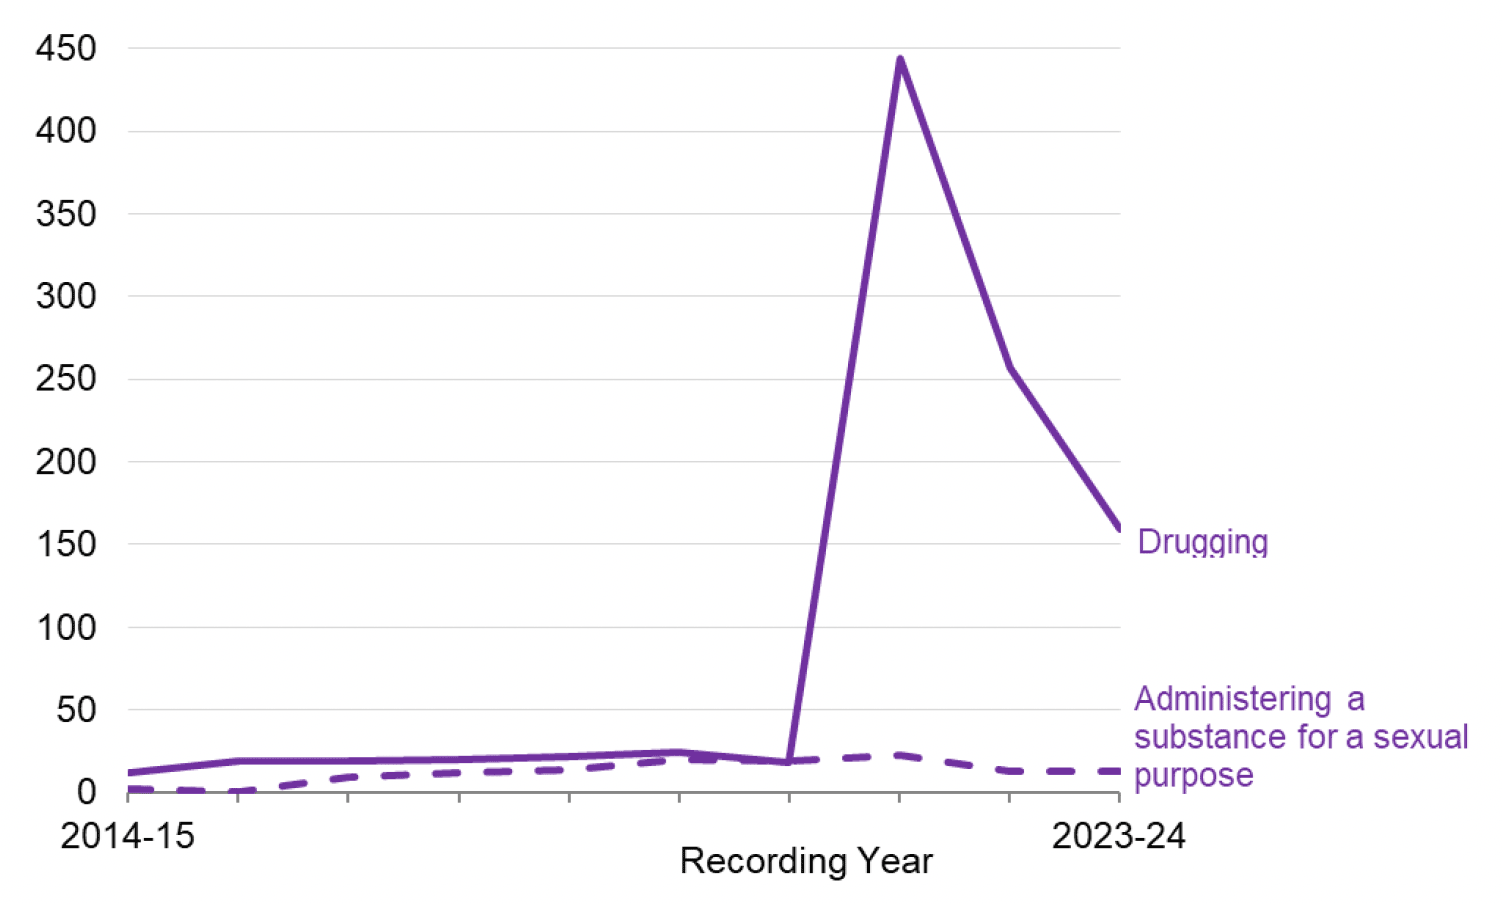 A line chart showing that in the latest three years there have been a significantly higher recorded level of drugging crimes. In 2021-22 these crimes increased sharply to a peak of 444, since then they have decreased significantly although levels remain much higher than prior to 2021-22. Administering a substance for a sexual purpose has remained stable at low levels over the last ten years.